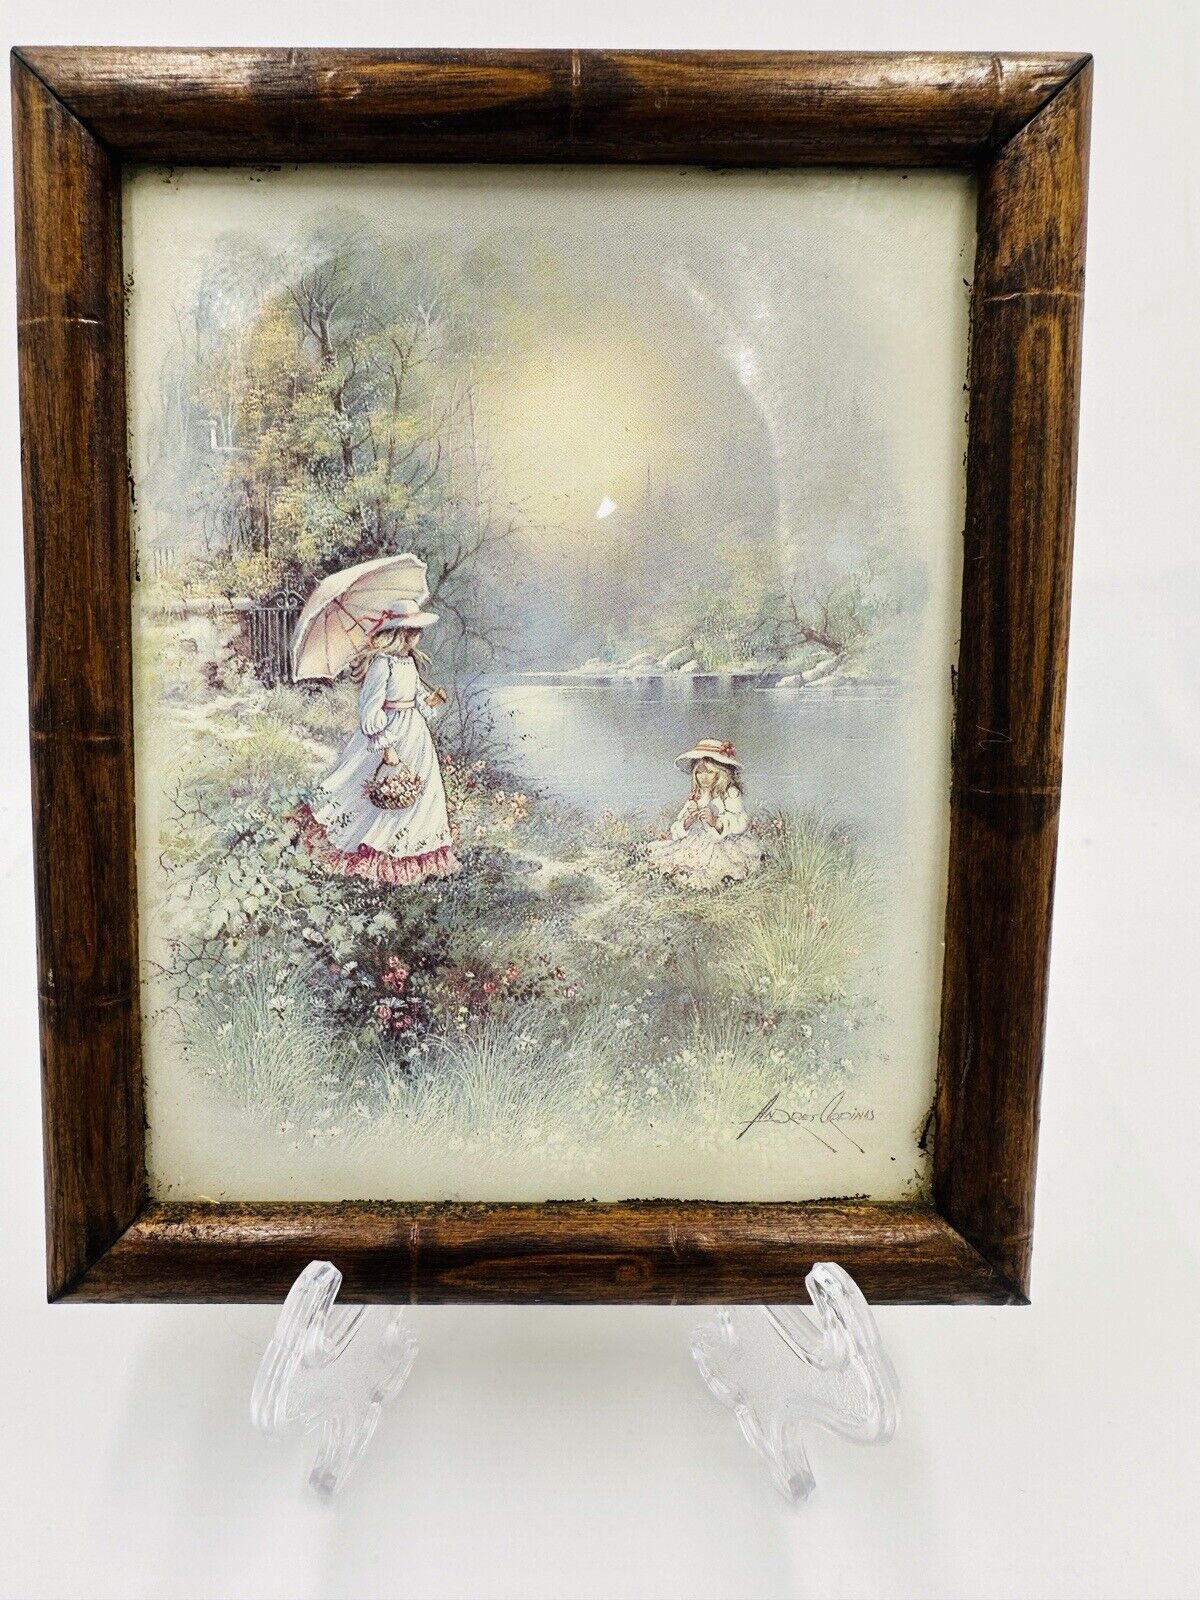 Andres Orpinas Sisters Prints Framed Vintage Miniature Wall Art Decor Artist